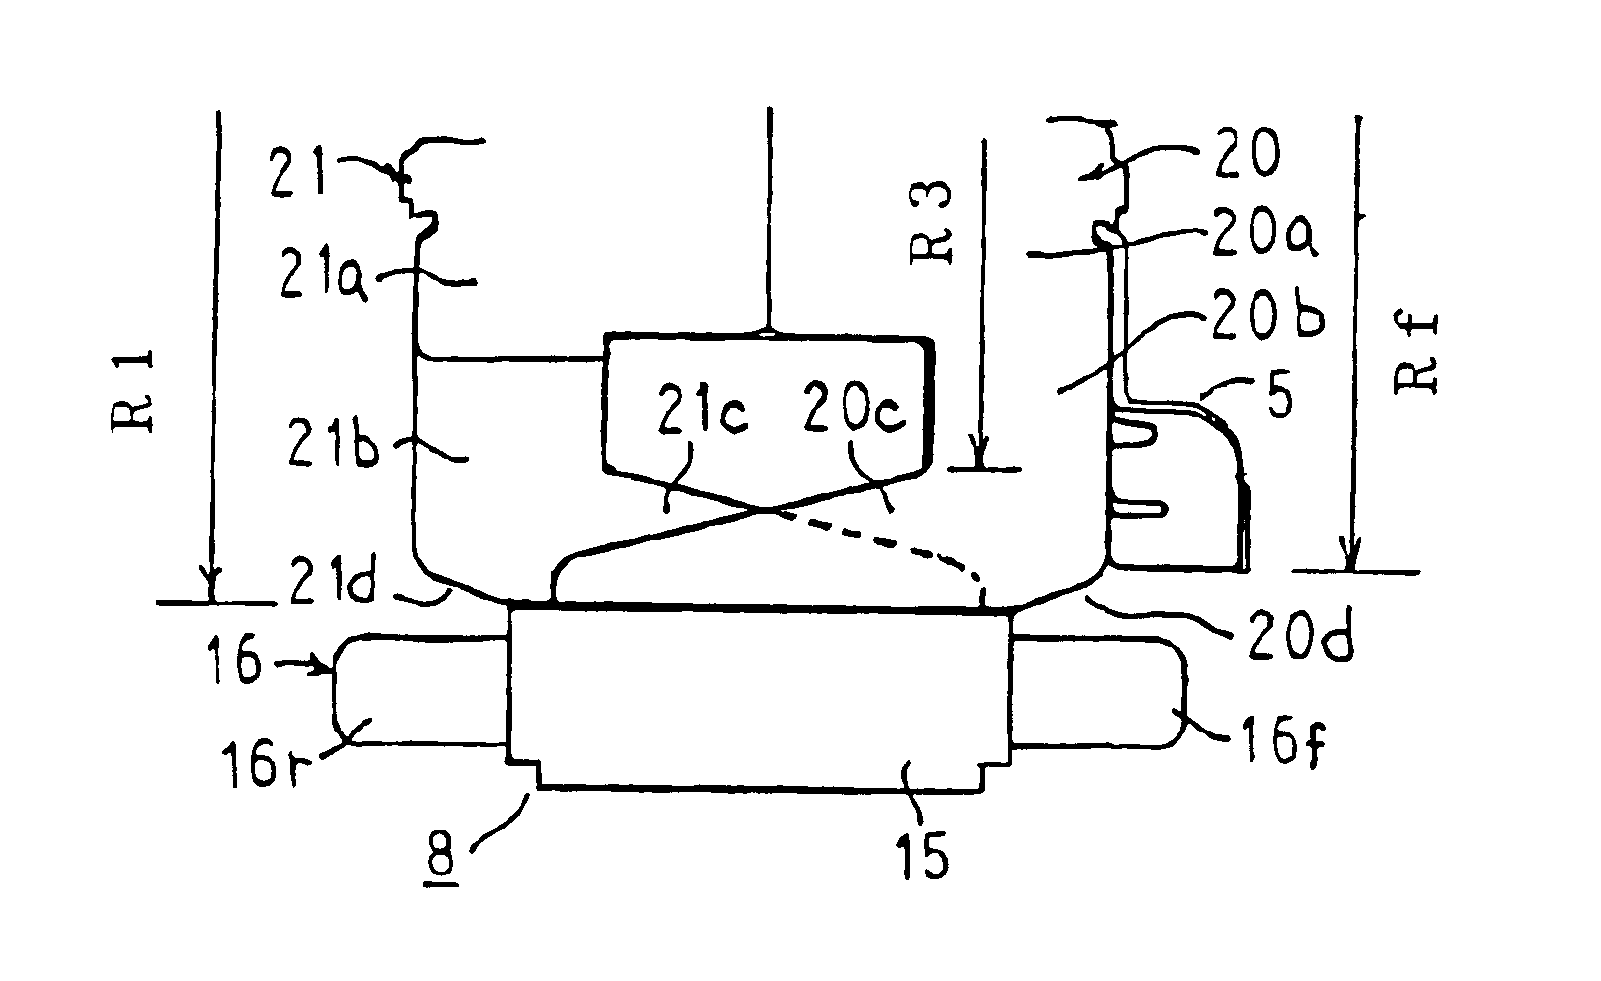 Ac generator for vehicle